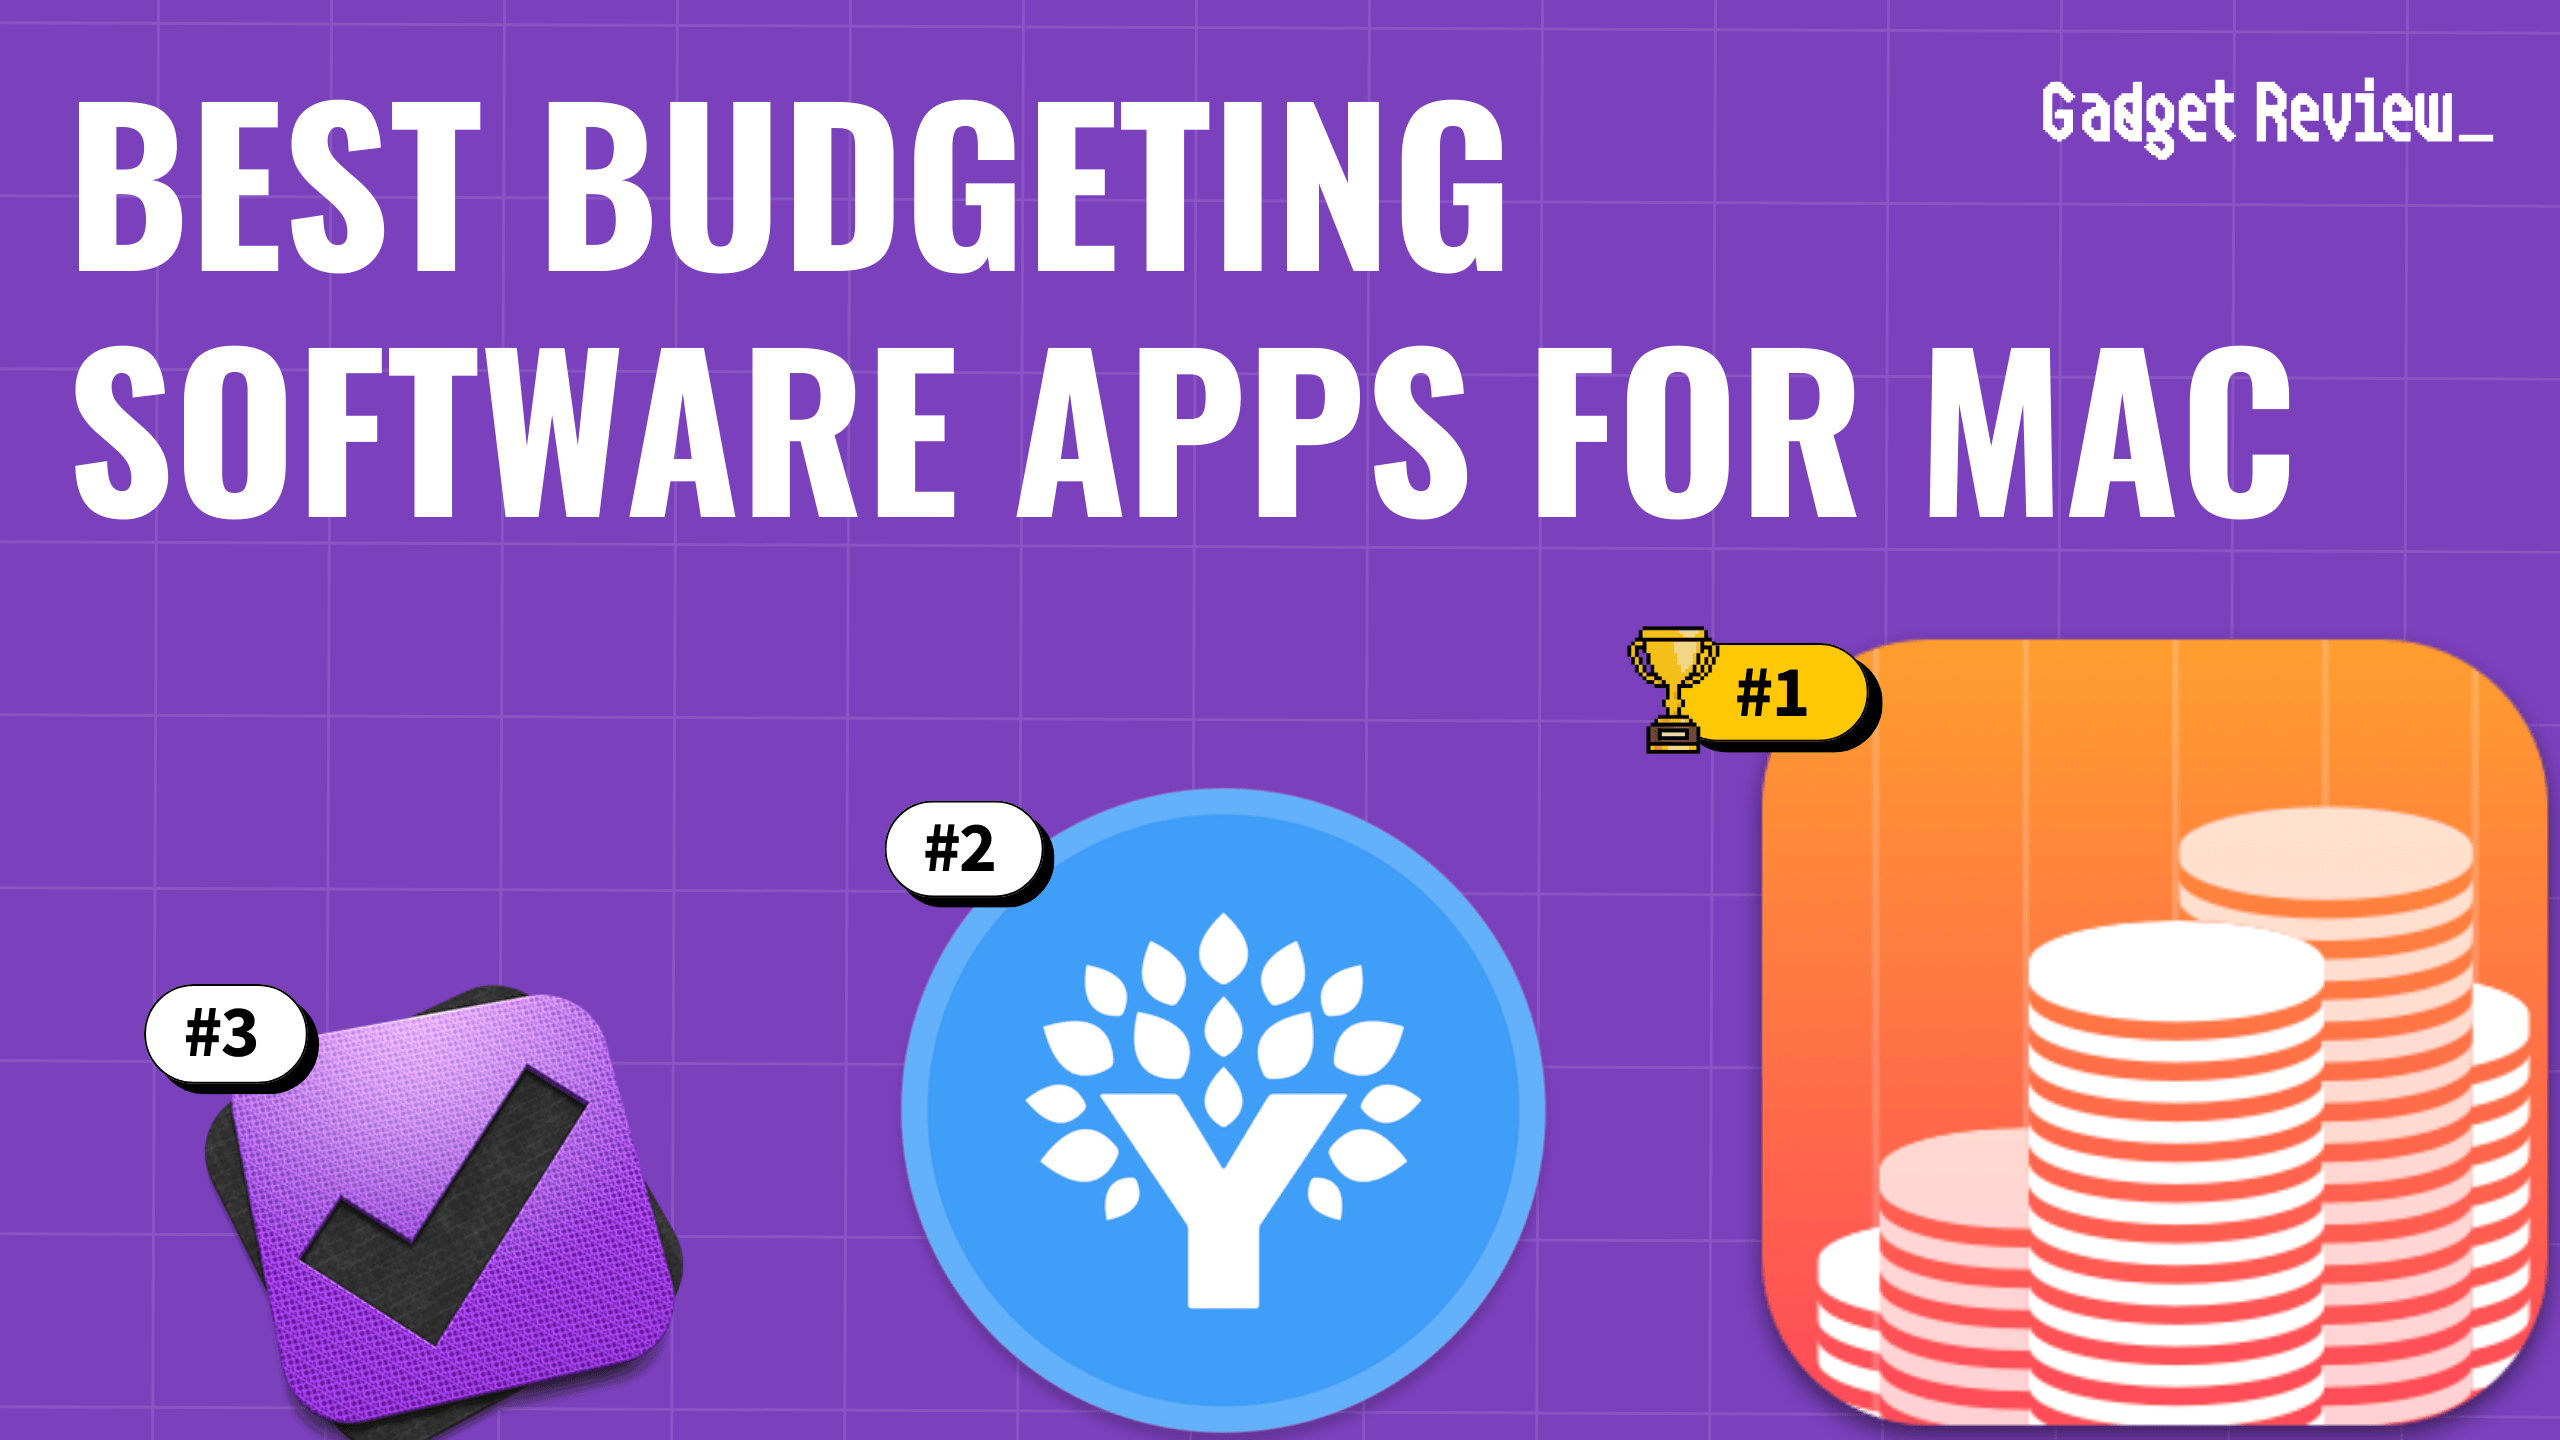 8 of the Best Budgeting Software Apps for Mac